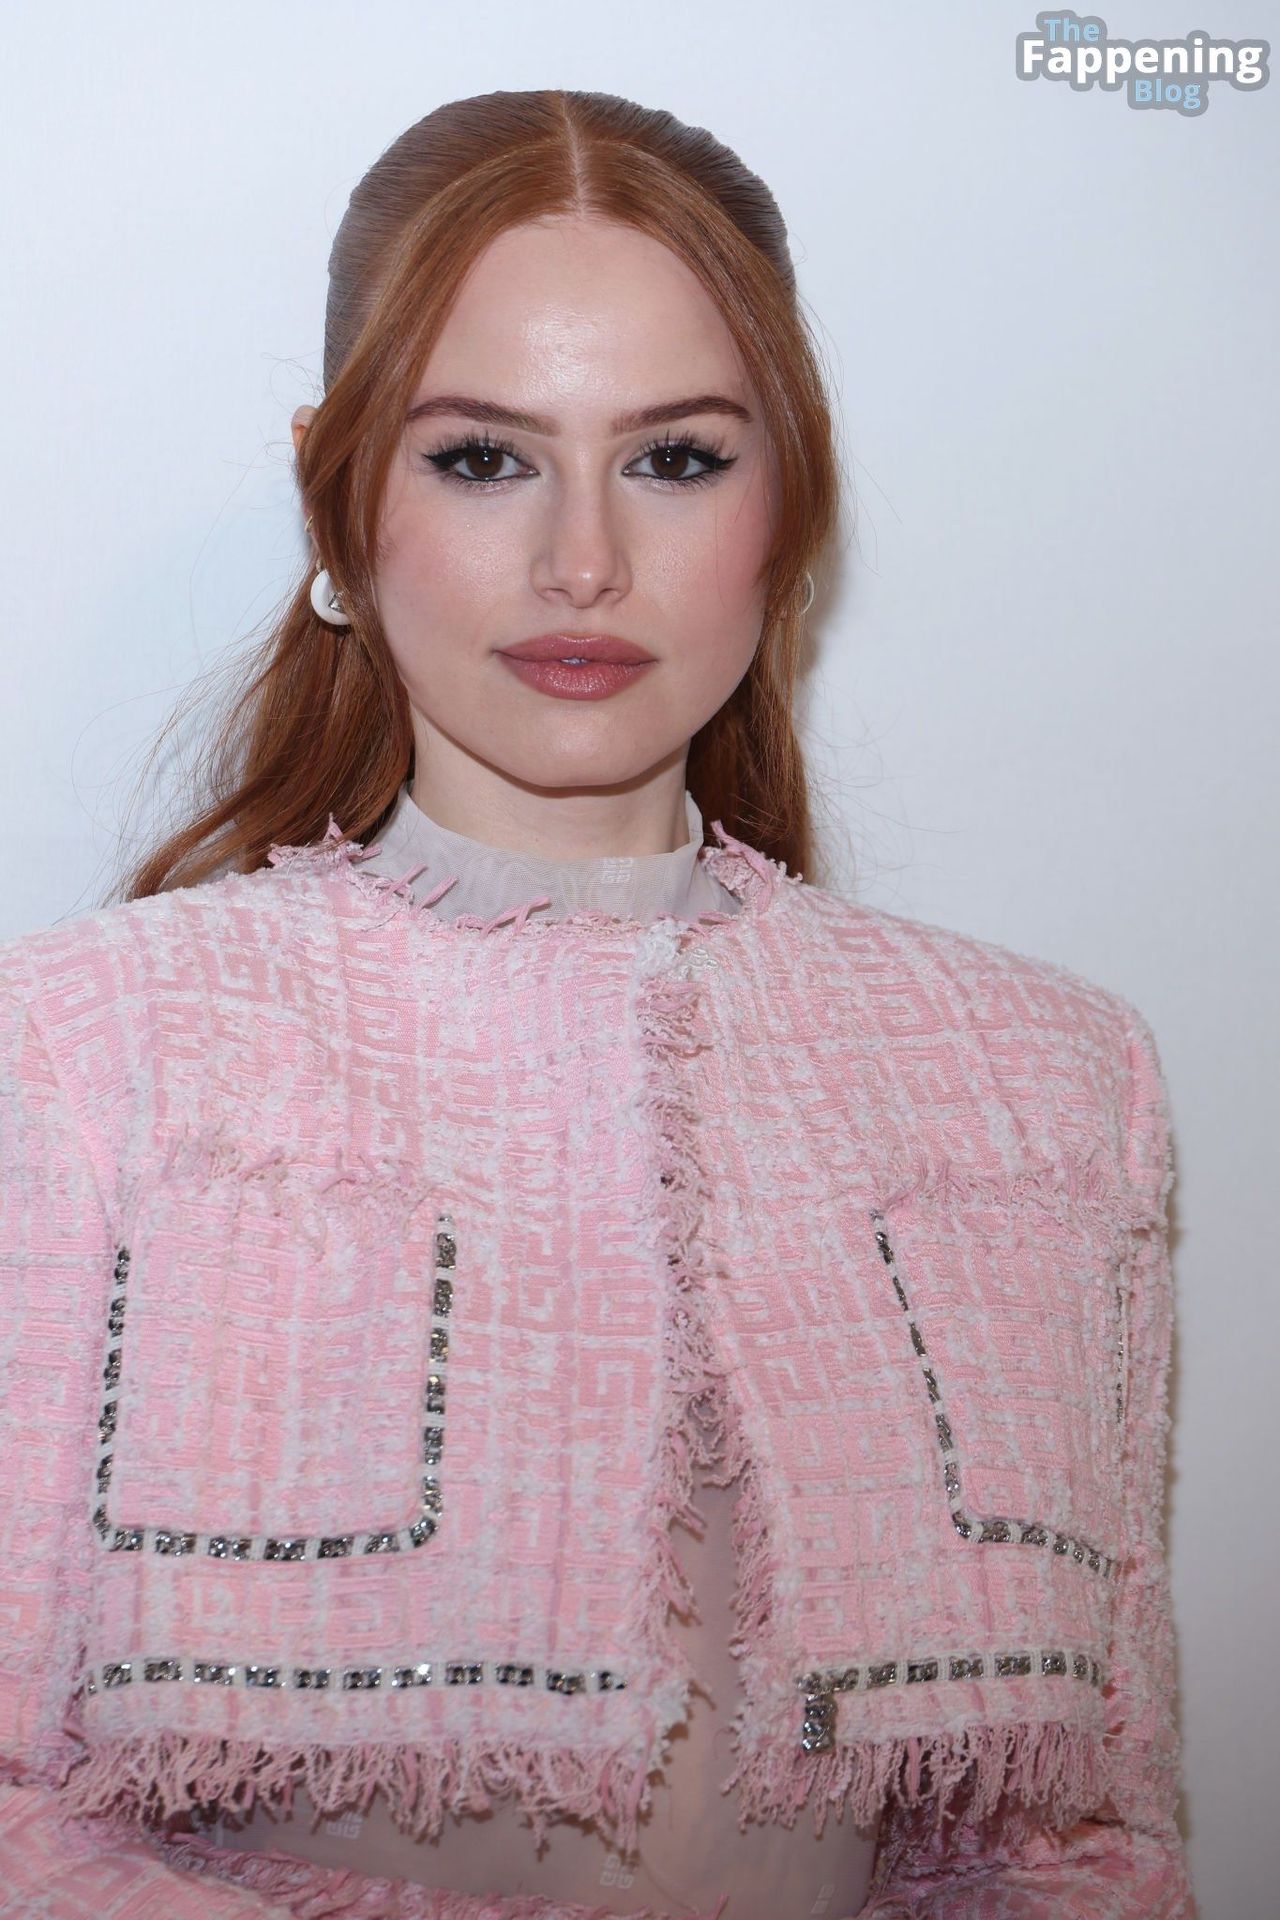 Madelaine Petsch Flashes Her Nude Tits During Paris Fashion Week (16 Photos)